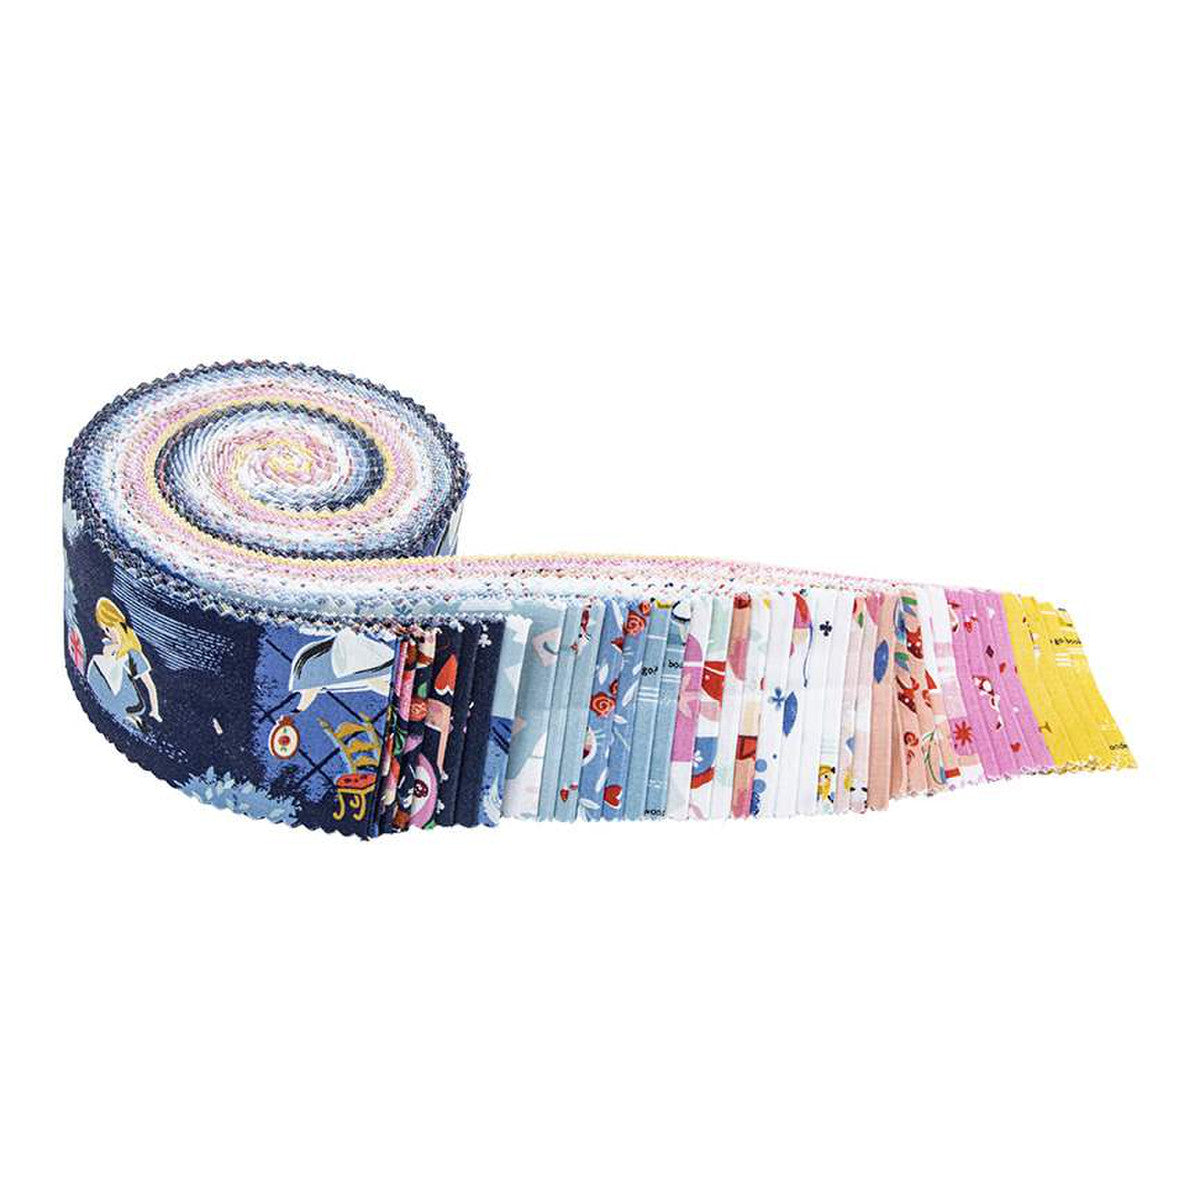 SALE Down the Rabbit Hole 2 1/2" Rolie Polie JELLY ROLL